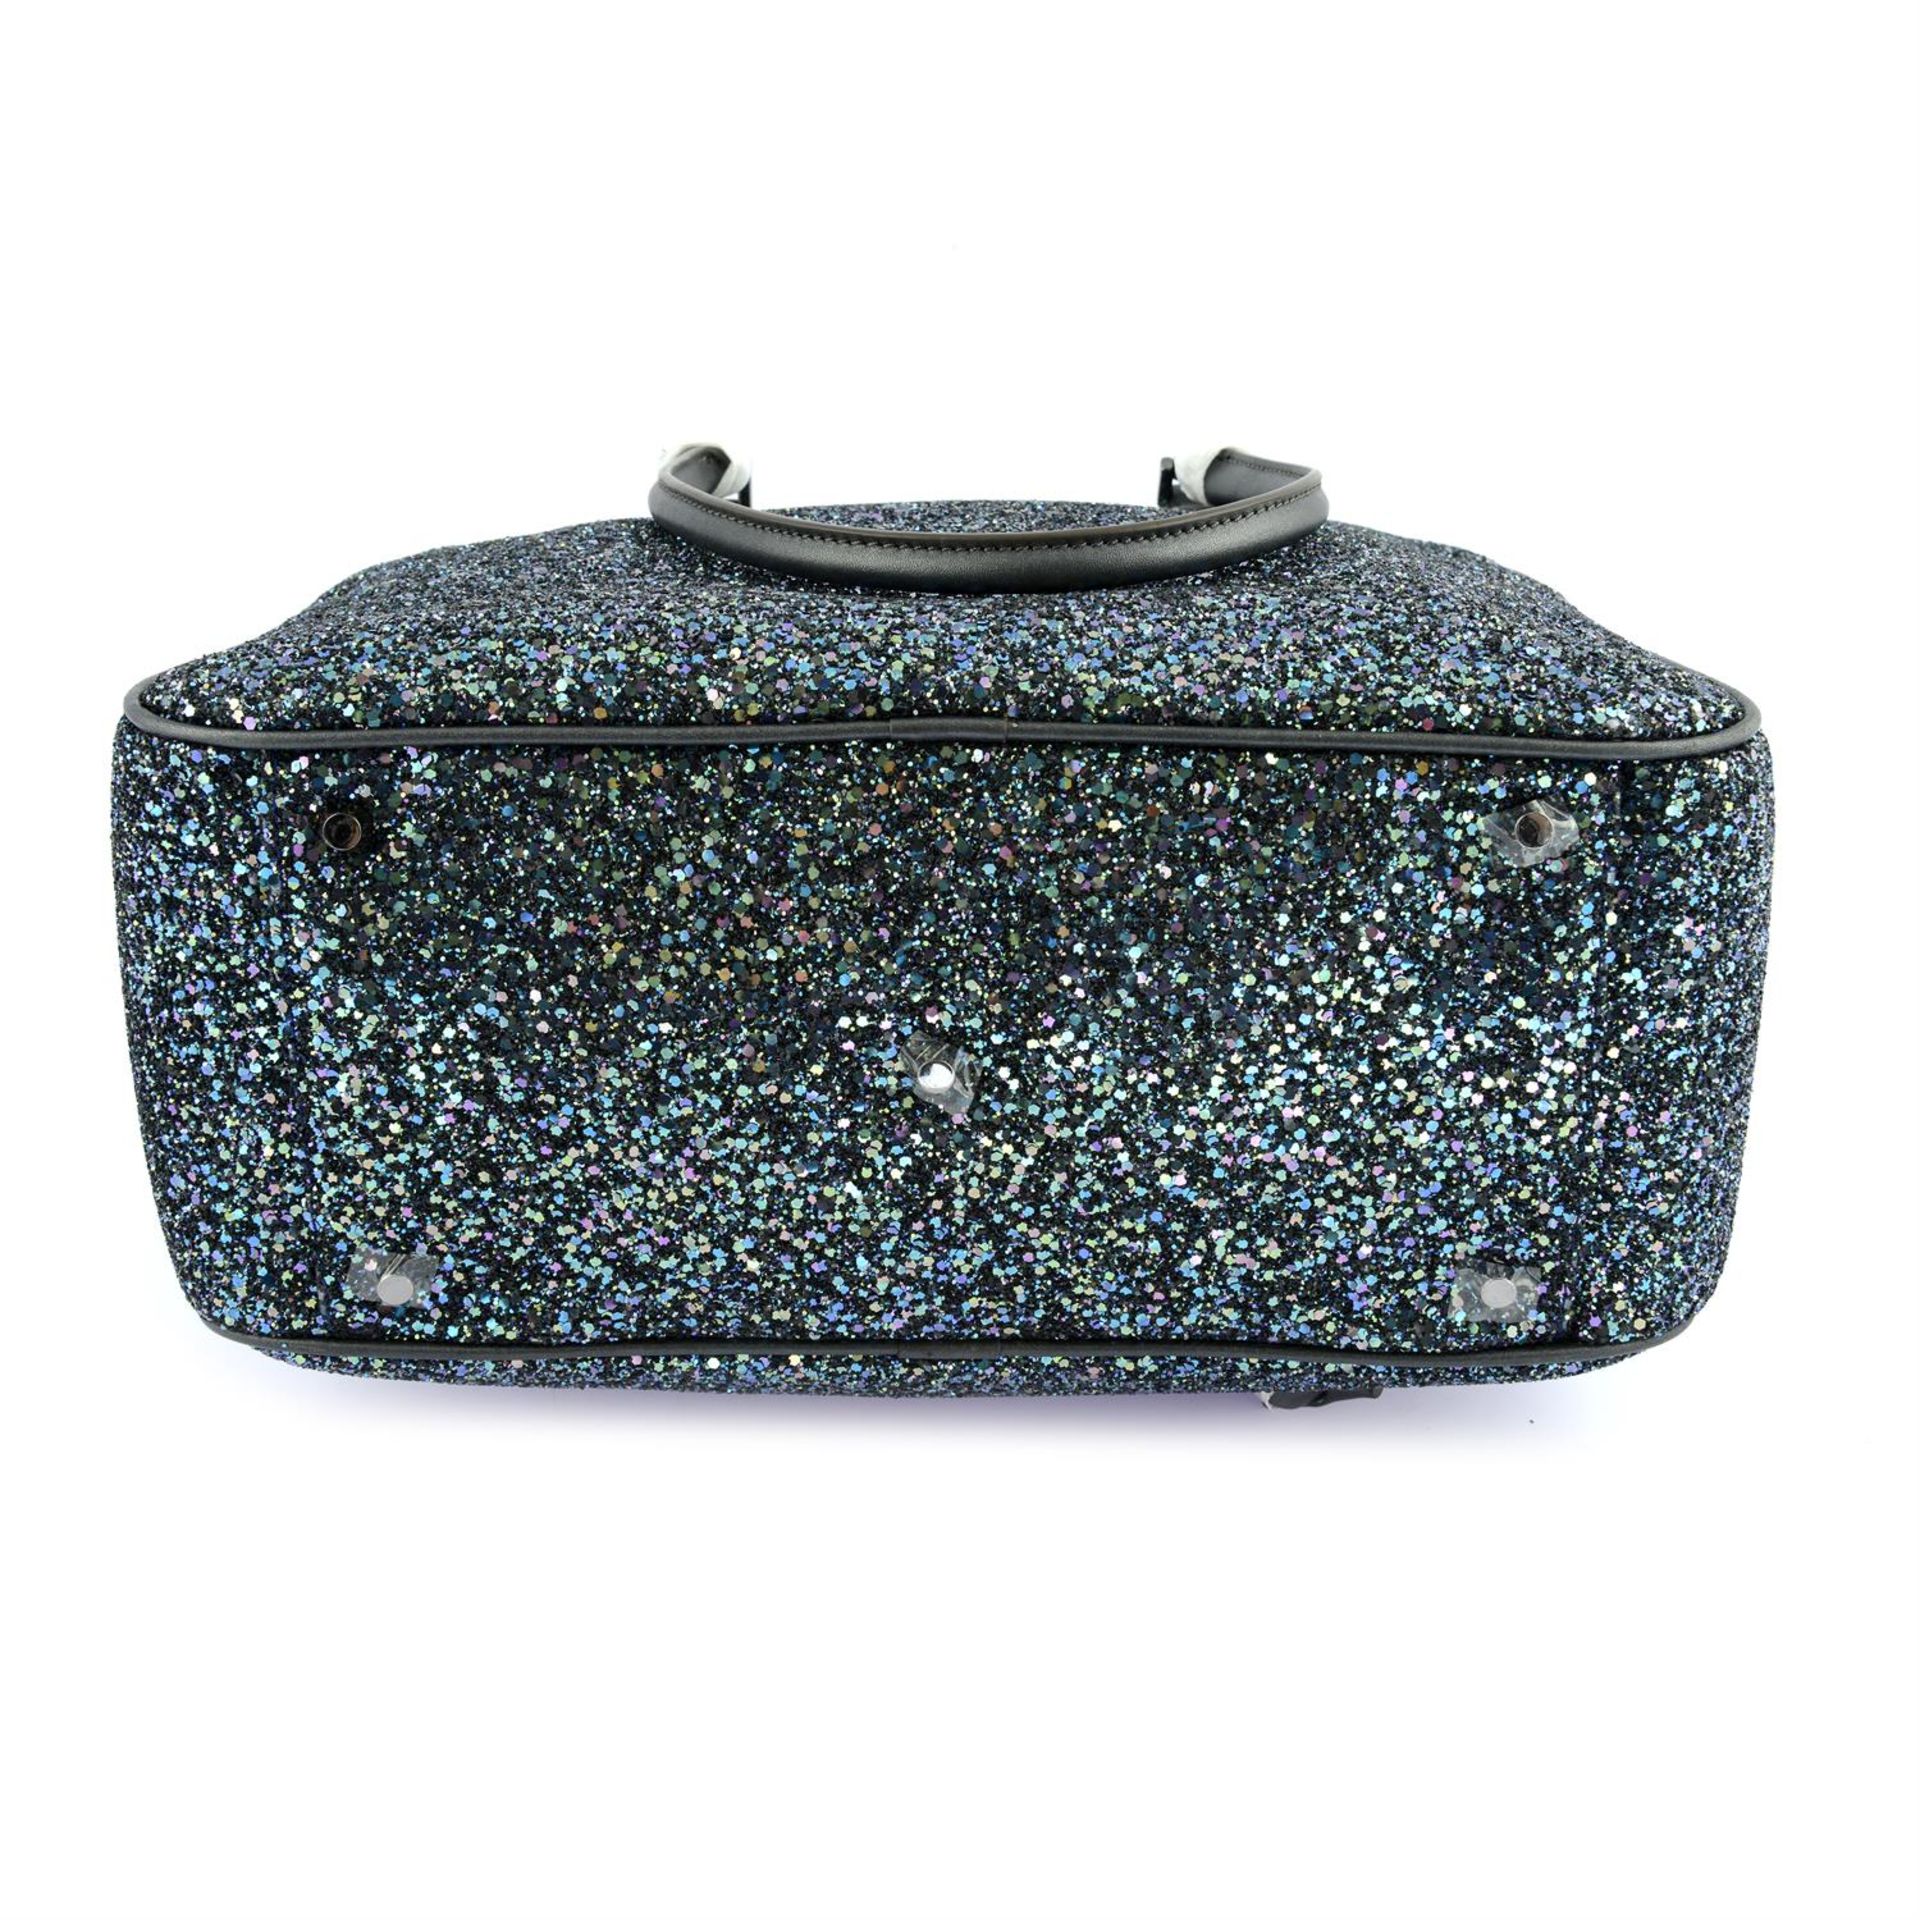 ANYA HINDMARCH -a glitter and black leather Boston bag. - Image 4 of 6